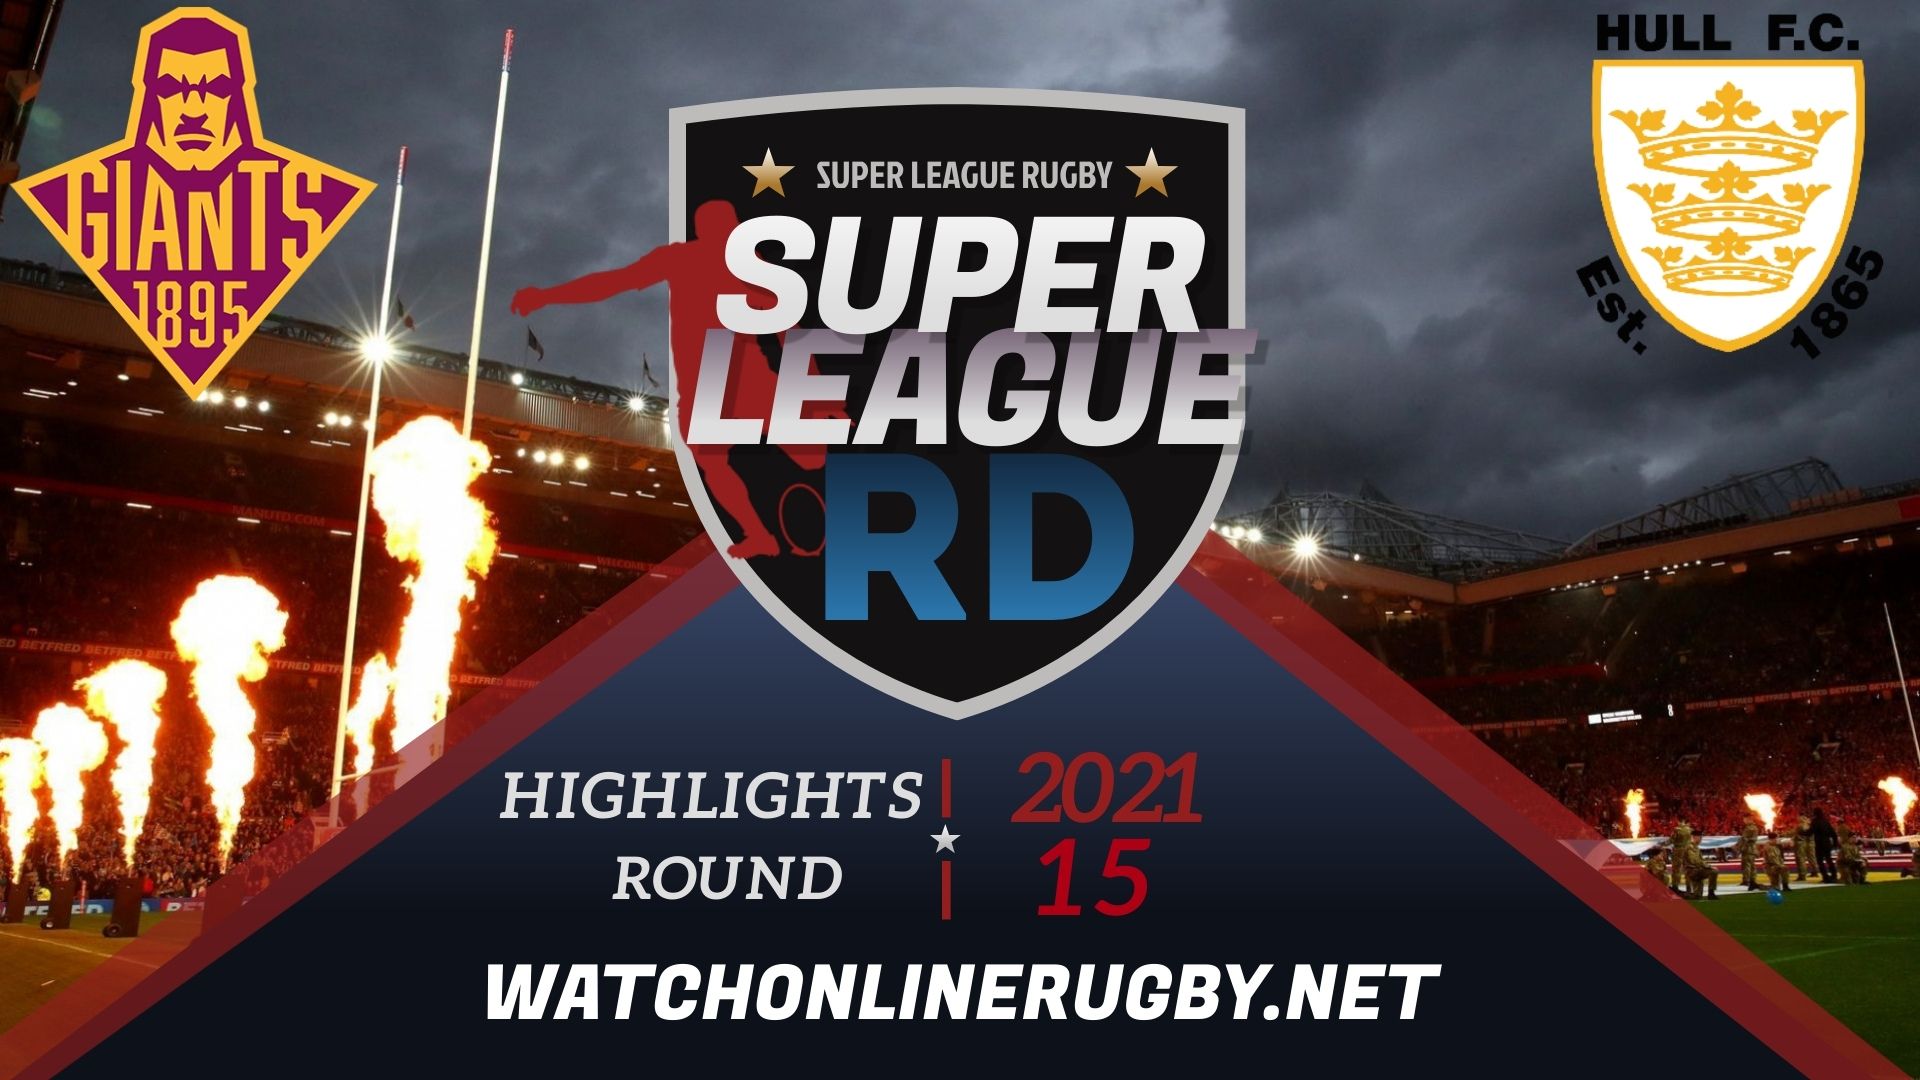 Huddersfield Giants Vs Hull FC Super League Rugby 2021 RD 15